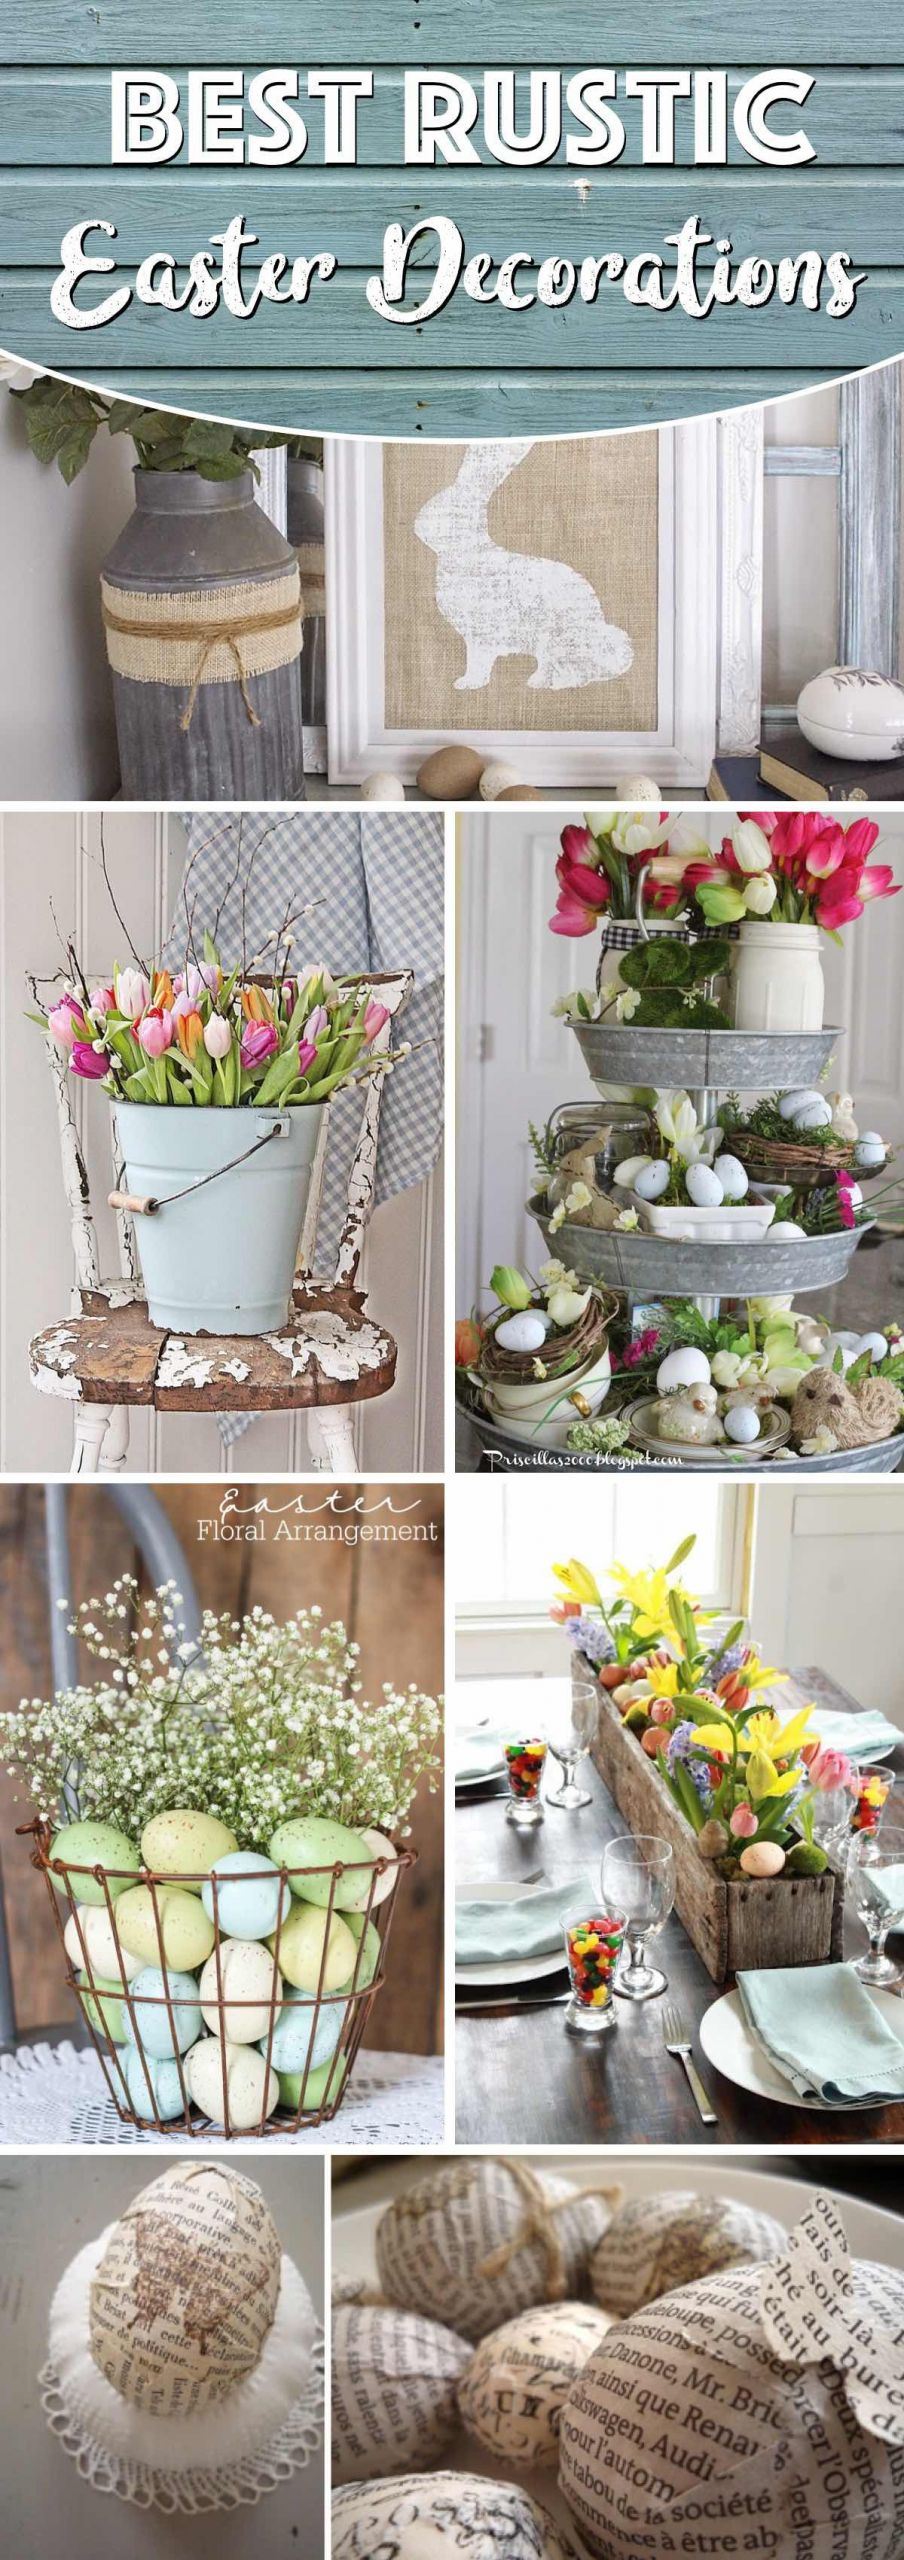 Easter Home Decor
 20 Rustic Easter Decorations Bringing a Farmhouse Appeal